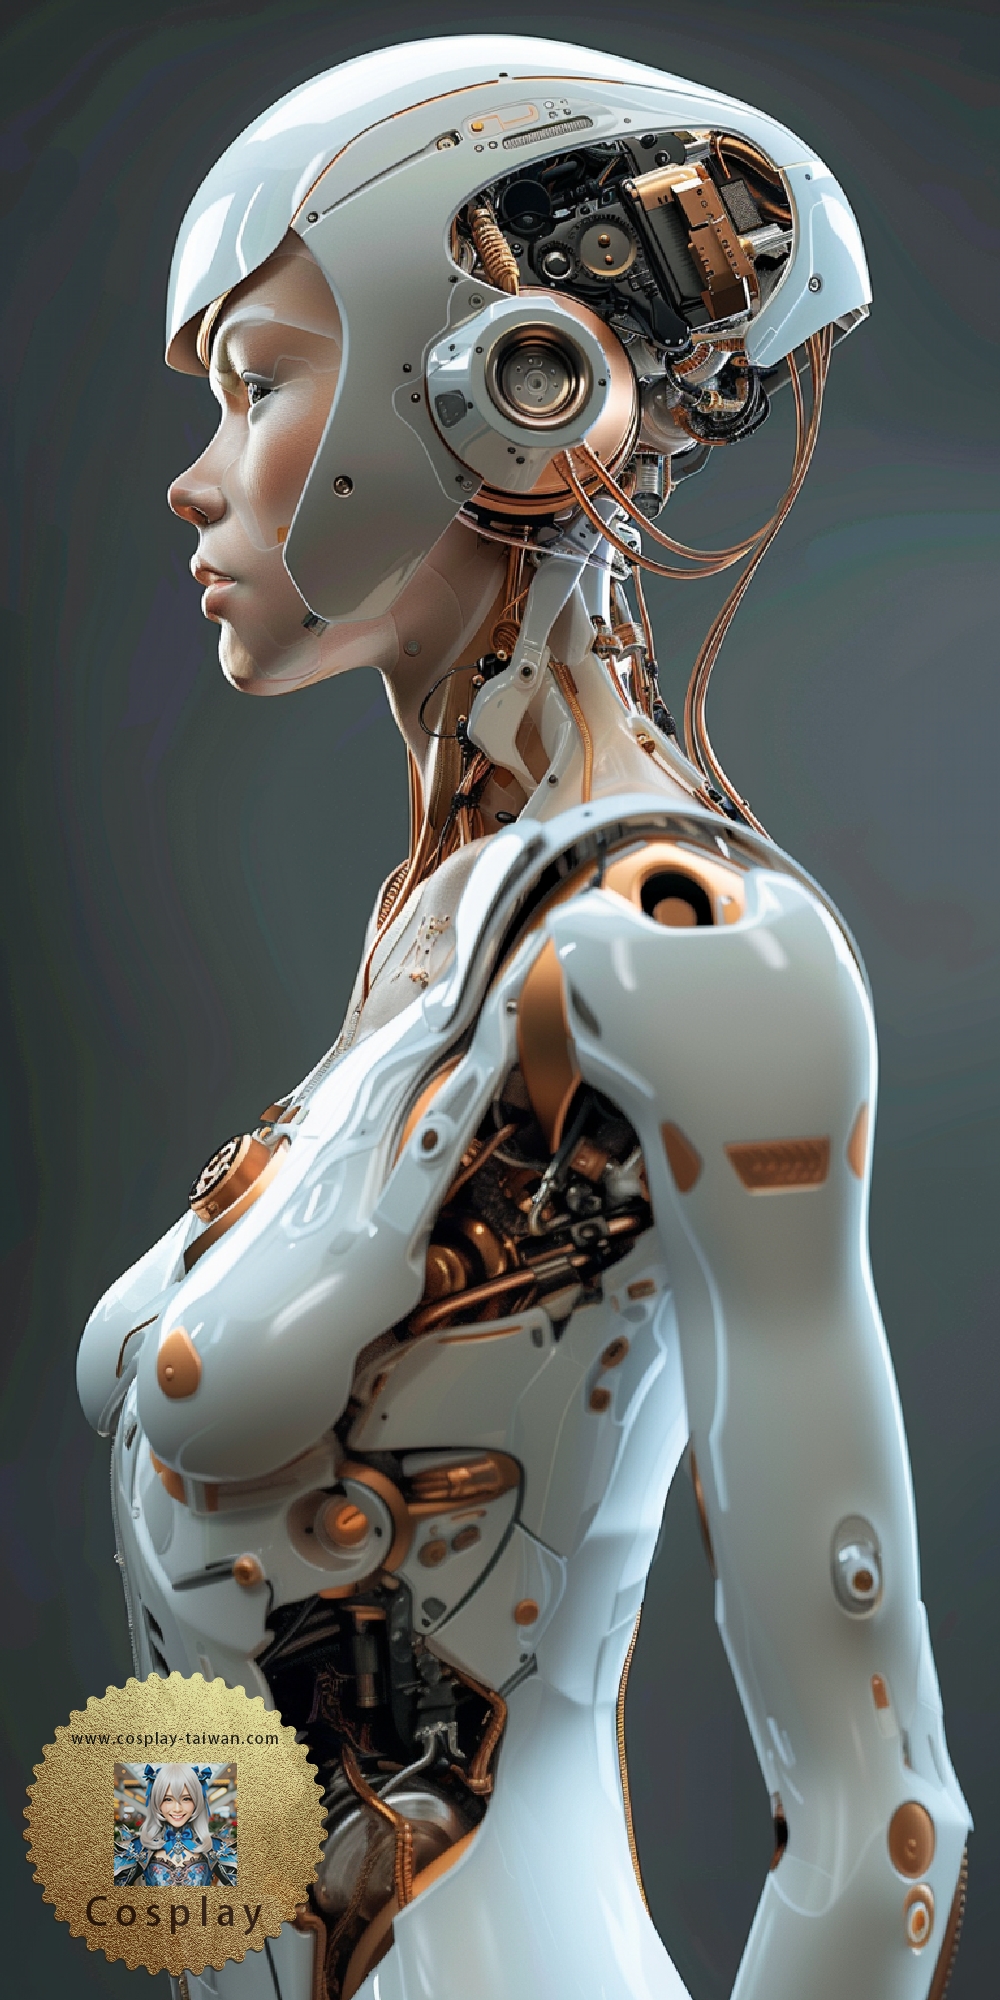 leonchou1968_This_is_a_detailed_portrait_of_a_futuristic_androi_17295db4-a8b7-4200-b9d4-484f774f2073.png